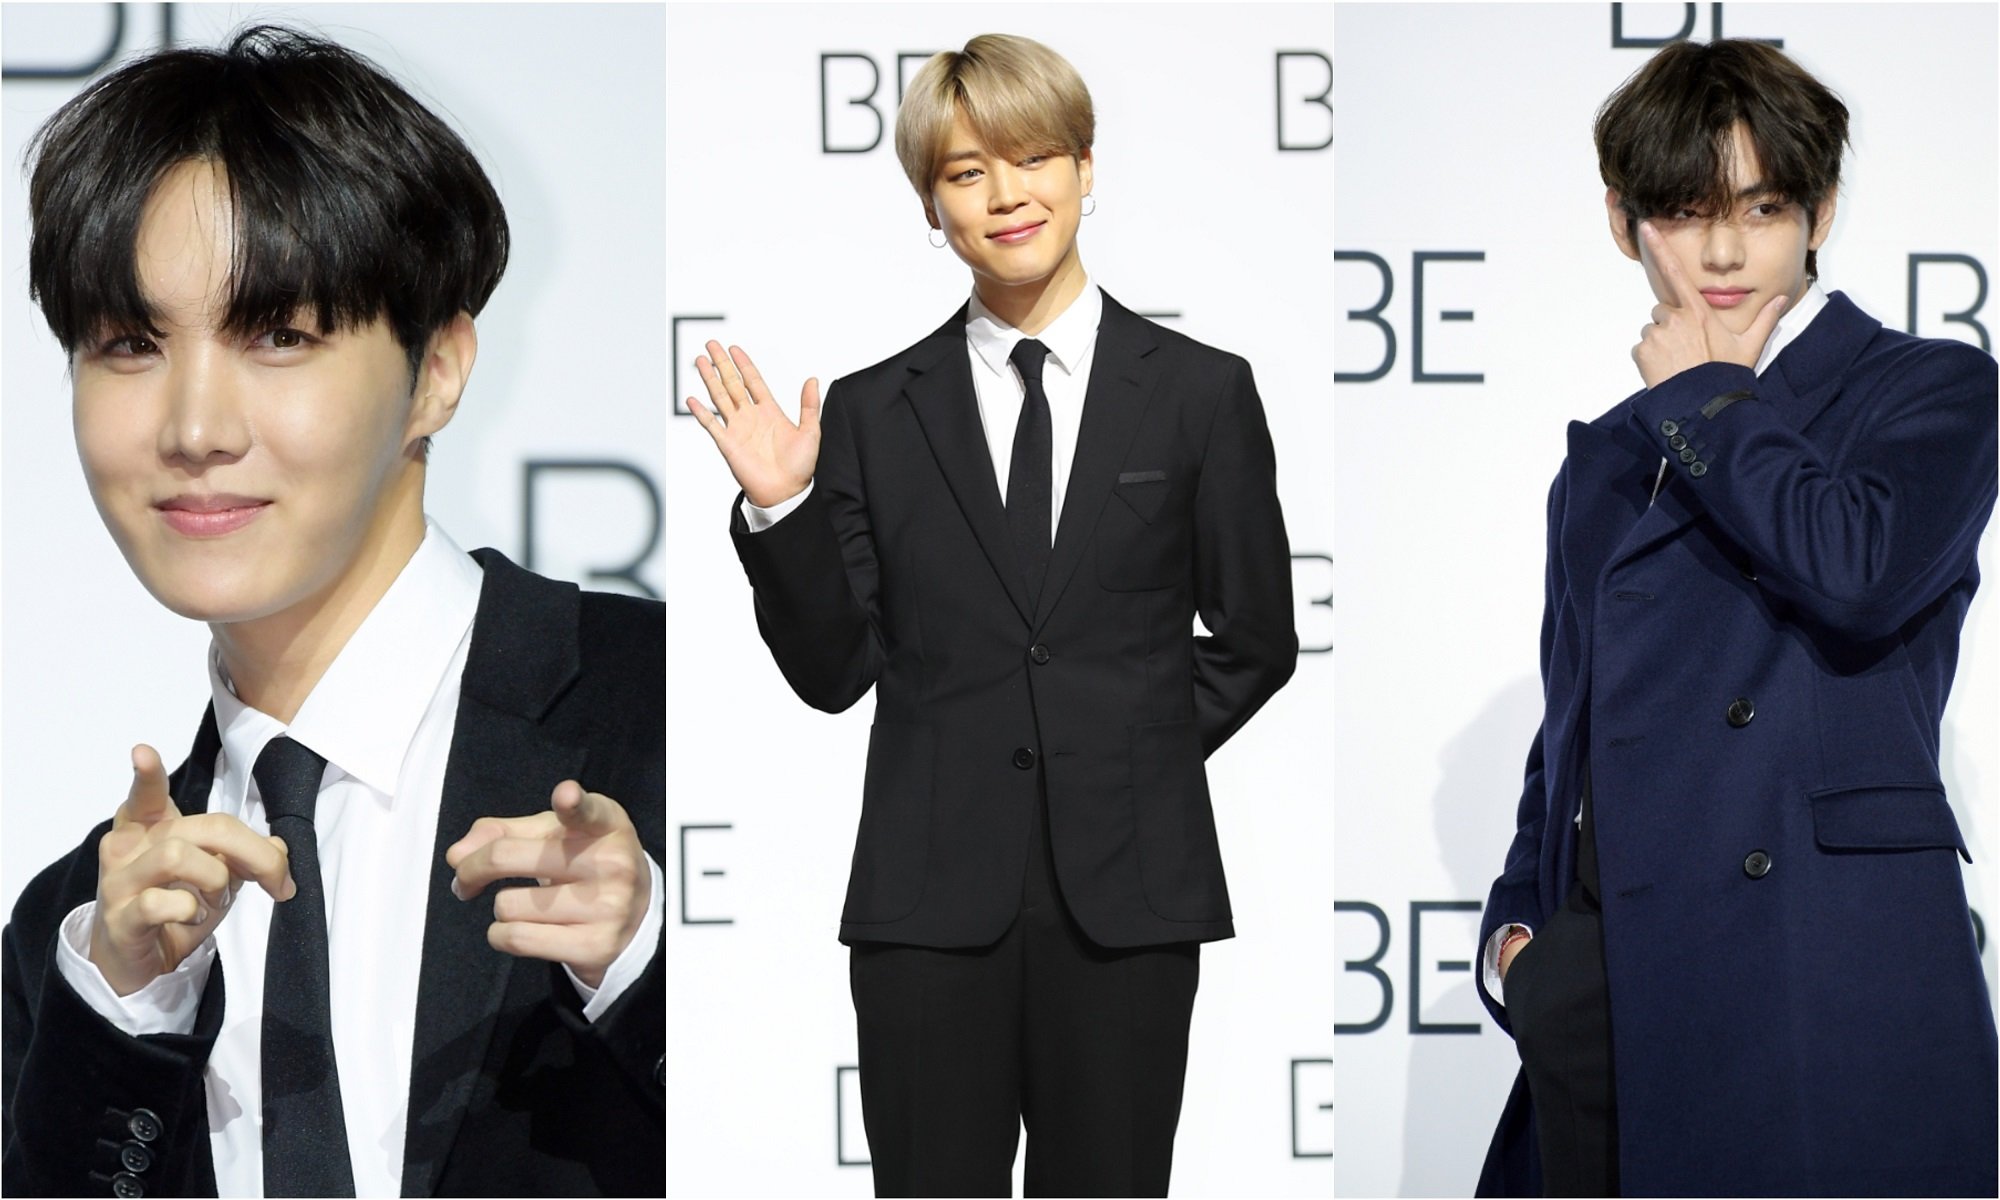 J-Hope, Jimin, and V of BTS at the band's 2020 press conference for their album 'BE'